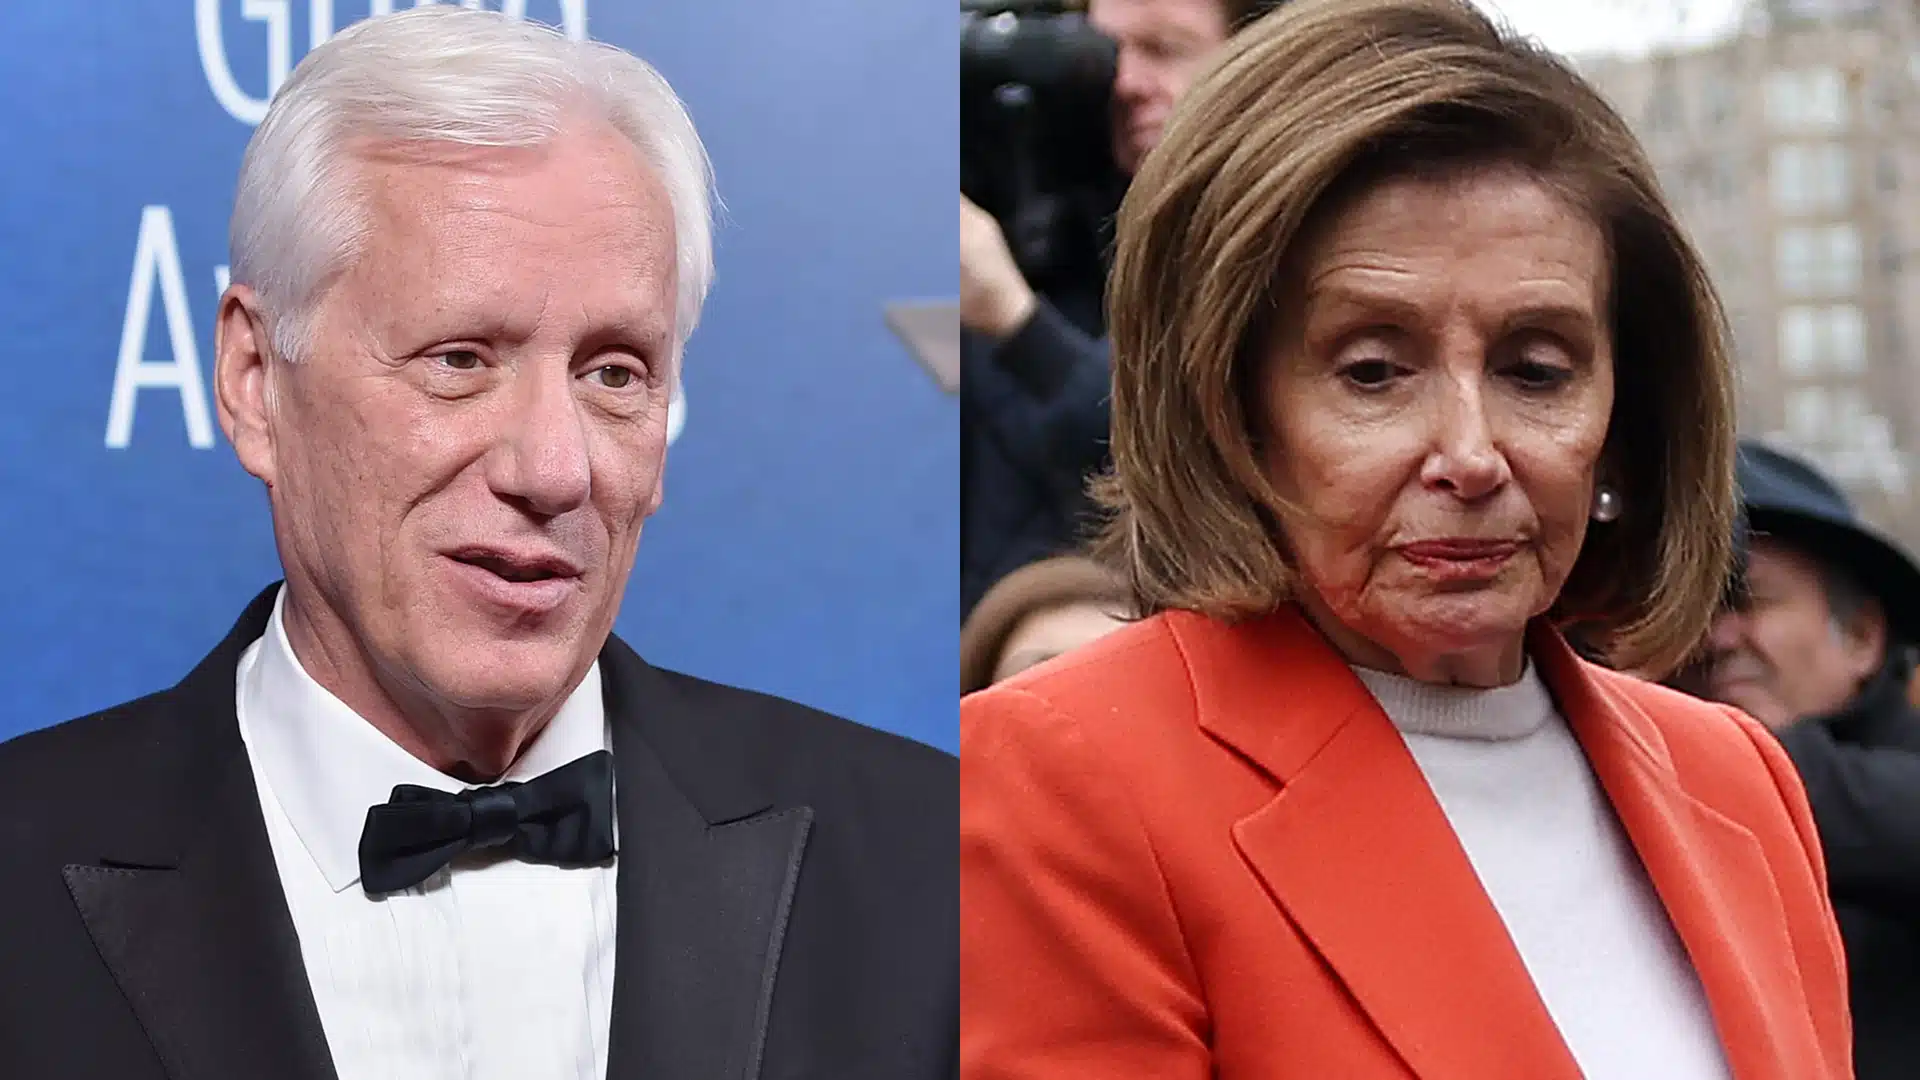 Actor James Woods To Sue DNC Over Twitter Censorship